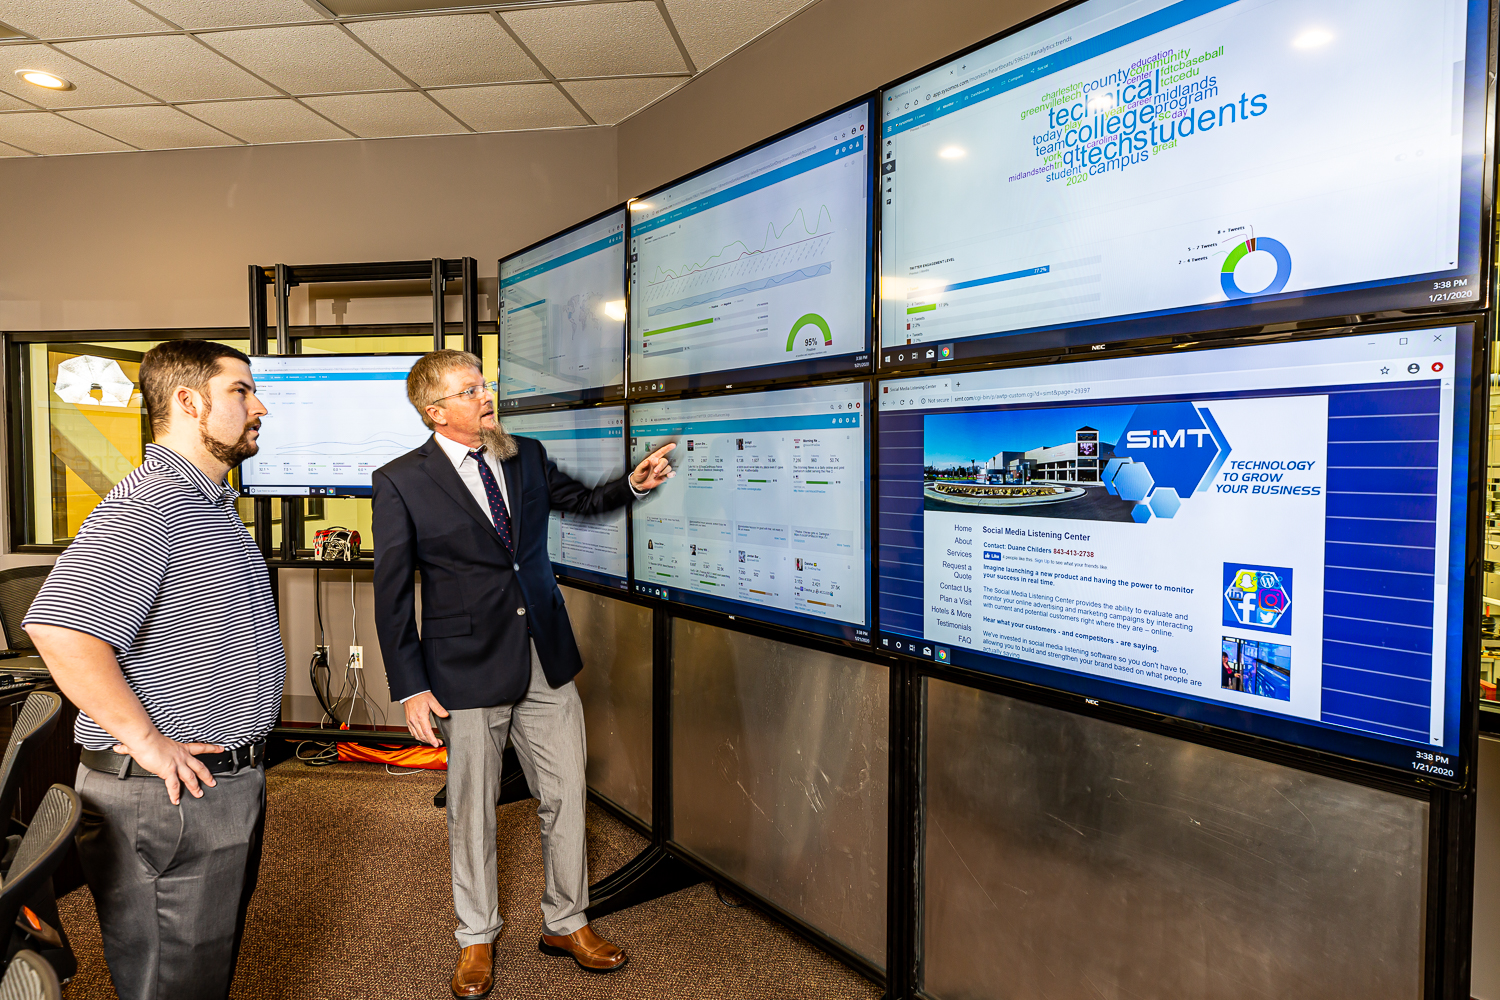 The manager of the Social Media Listening Center shows some of the dashboards used in social media monitoring to a client.